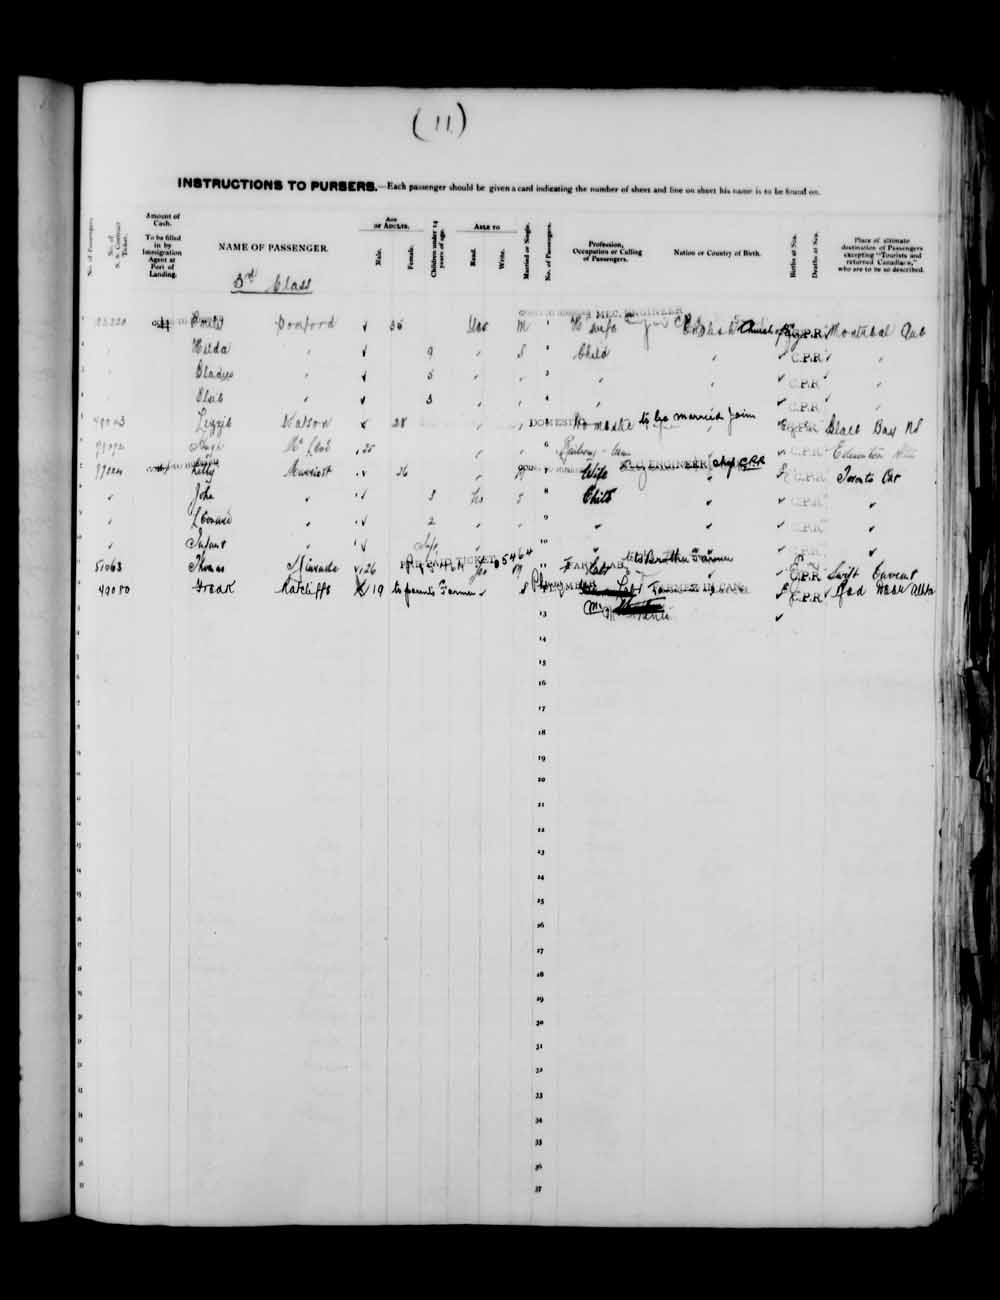 Digitized page of Quebec Passenger Lists for Image No.: e003591582